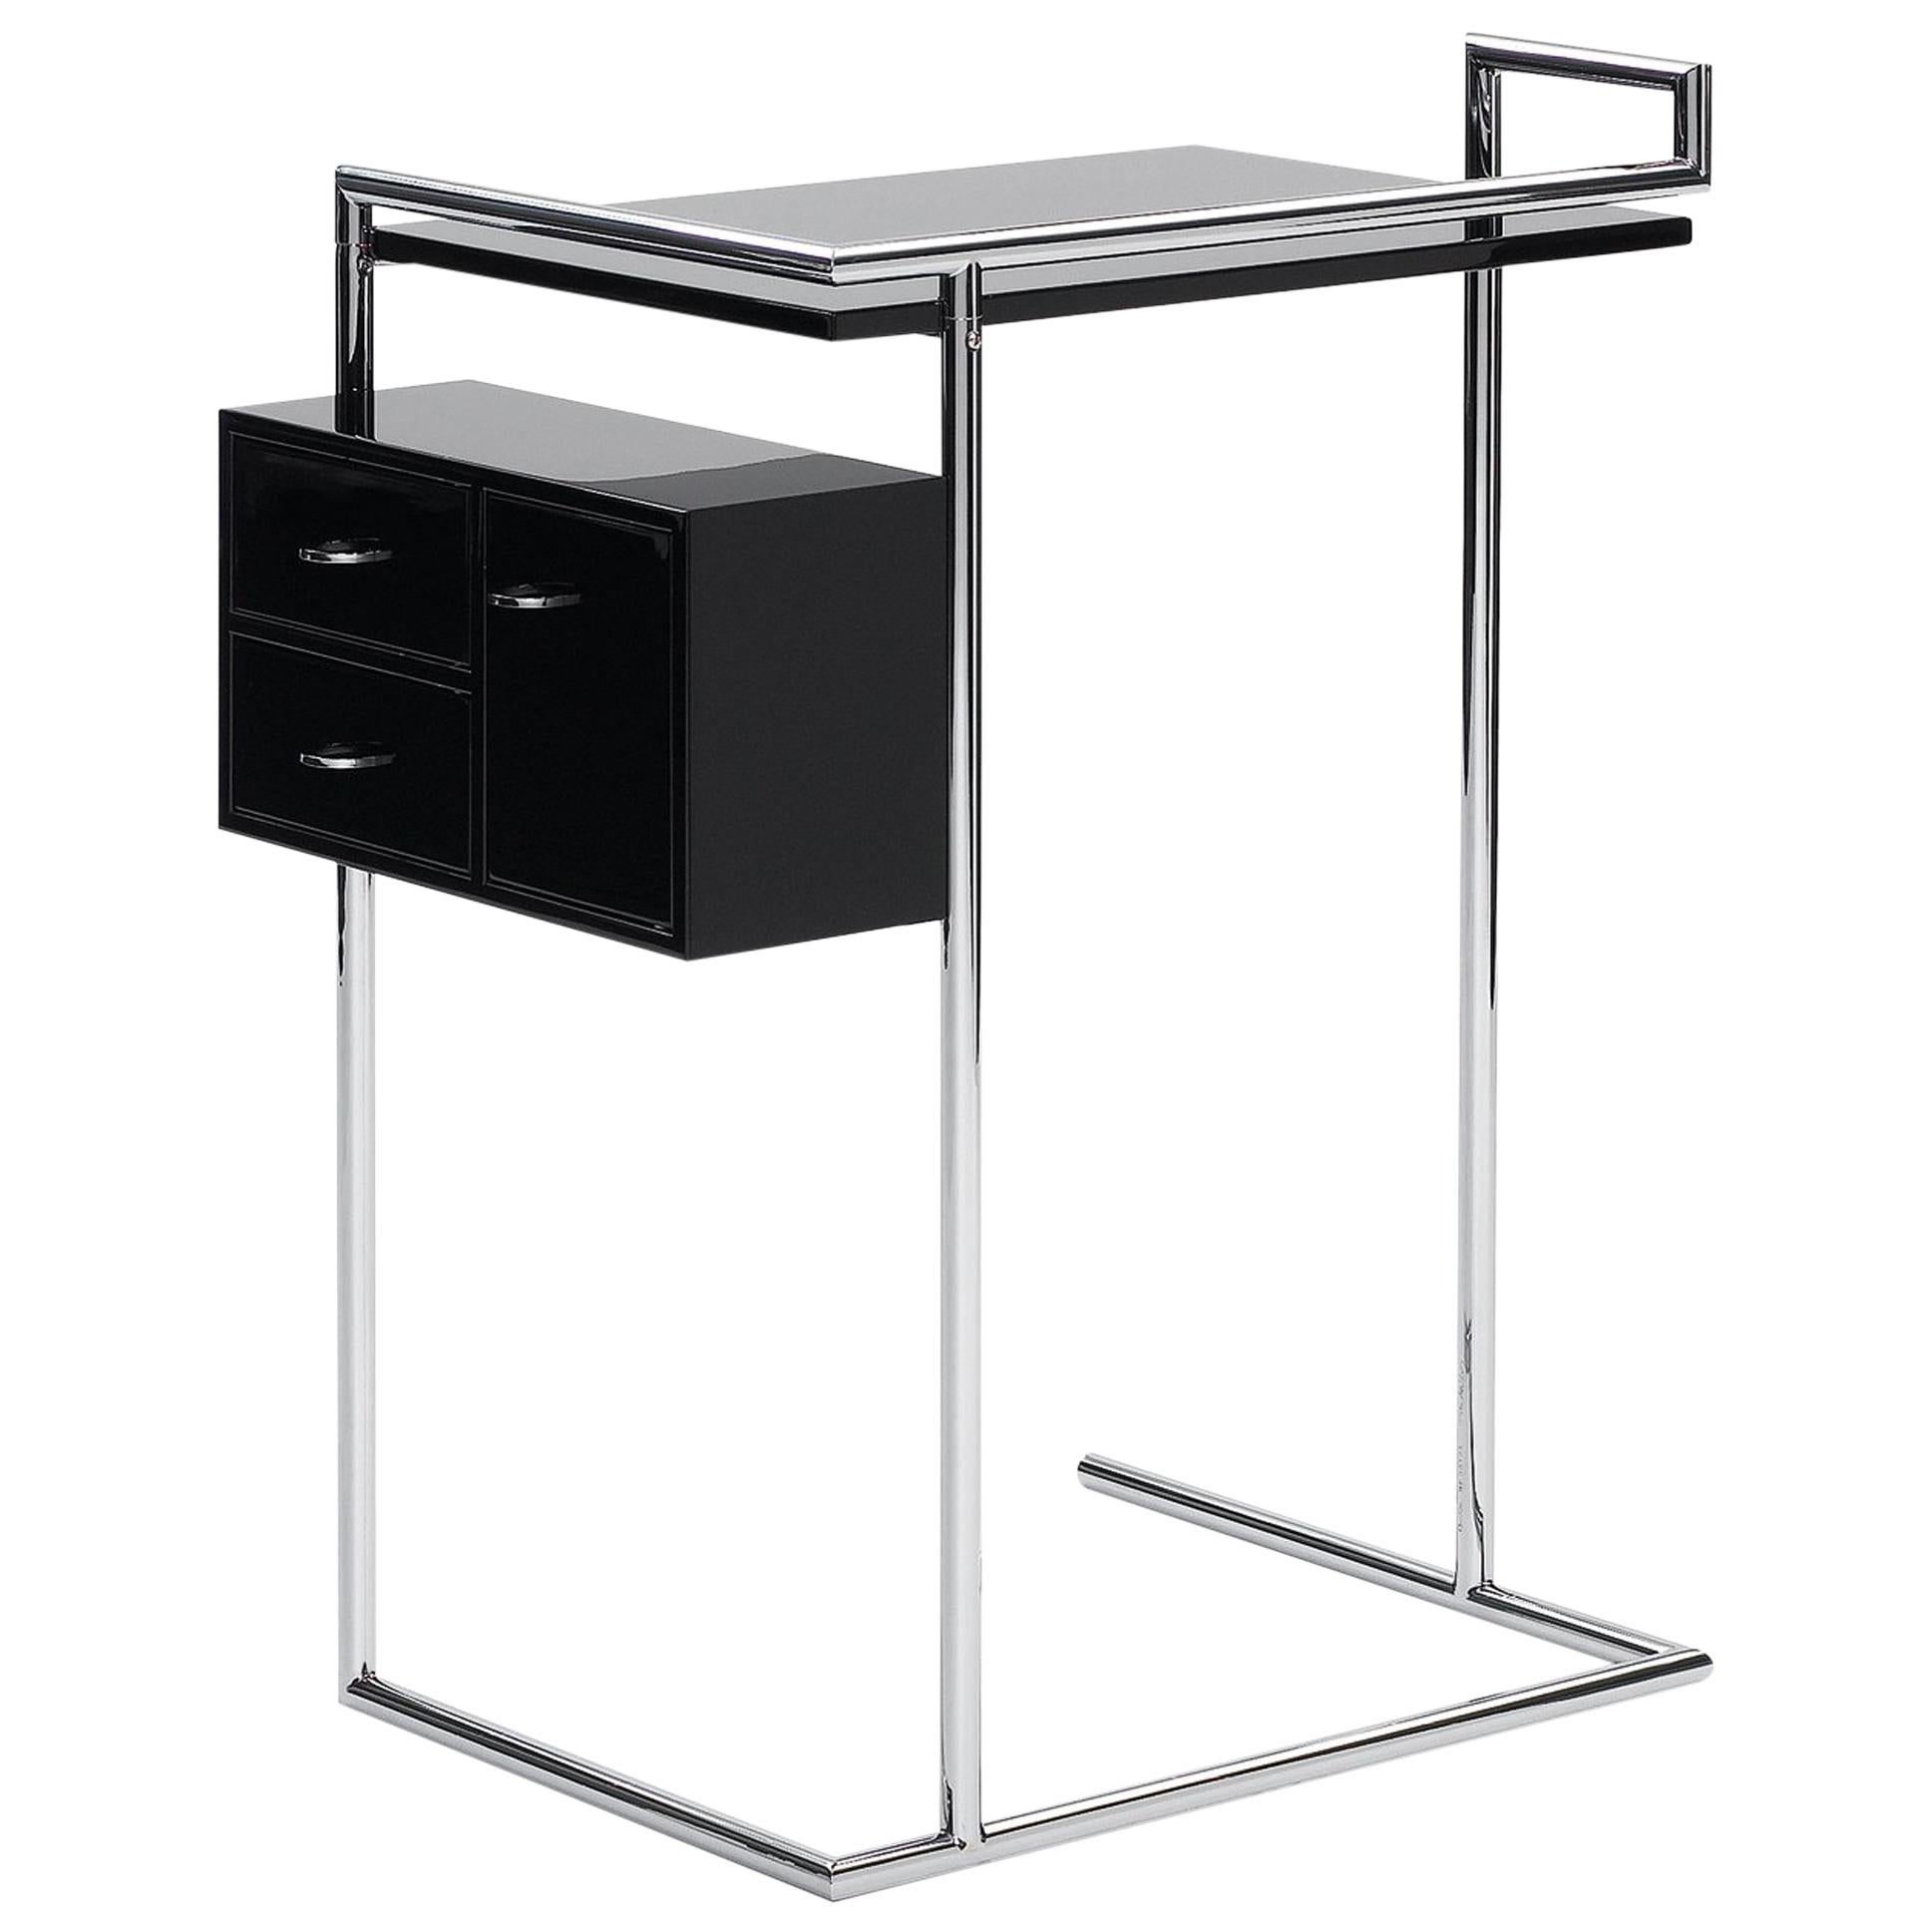 ClassiCon Petite Coiffeuse Table in Black by Eileen Gray